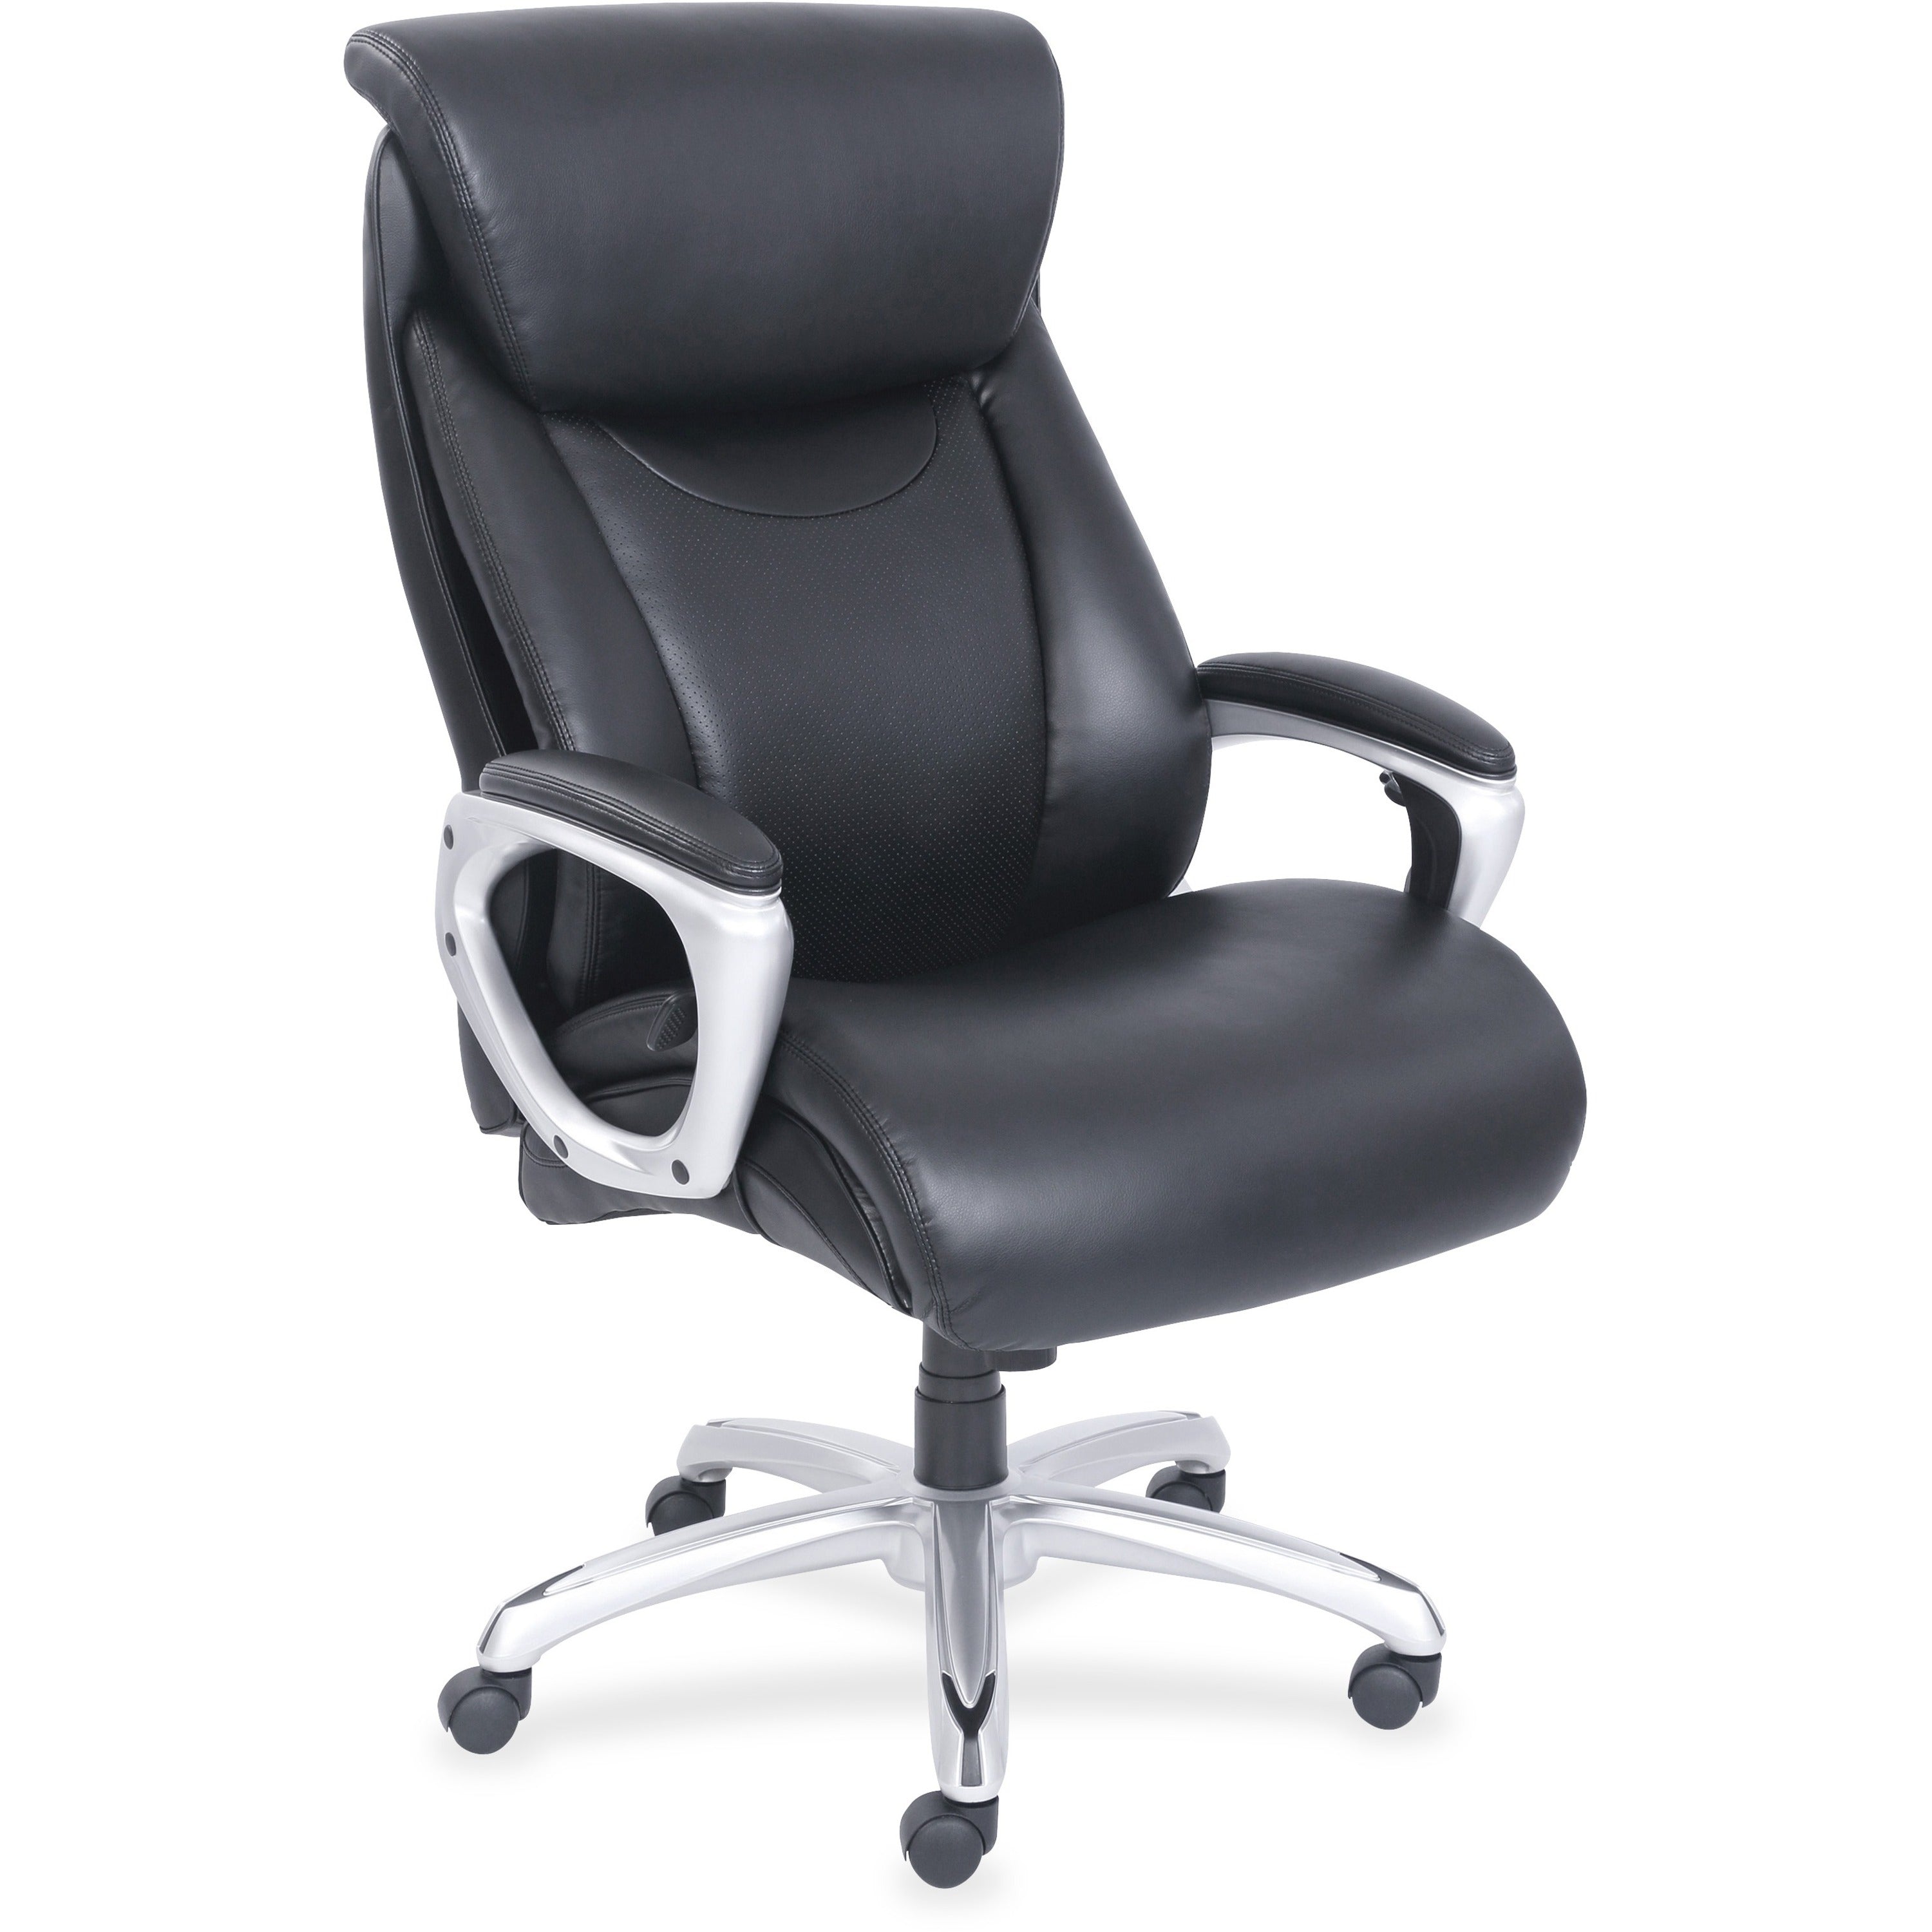 lorell-wellness-by-design-big-&-tall-chair-with-flexible-air-technology-black-bonded-leather-seat-black-bonded-leather-back-5-star-base-armrest-1-each_llr48845 - 1